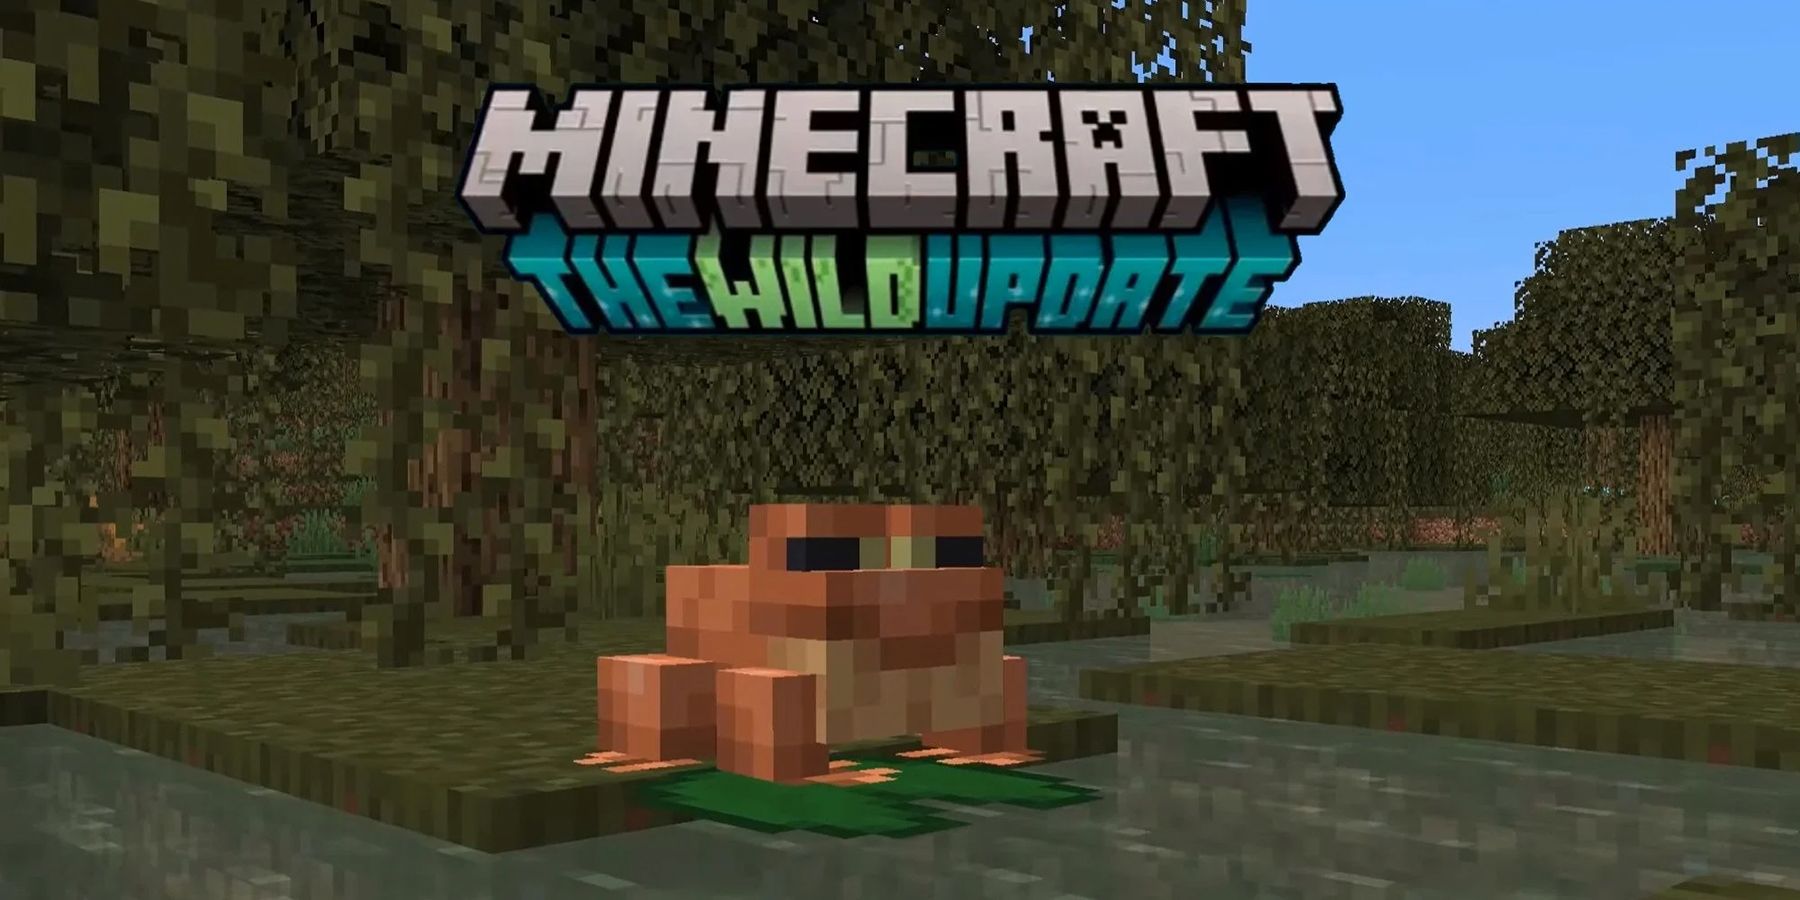 Find out about everything new in the Minecraft 1.19 Update